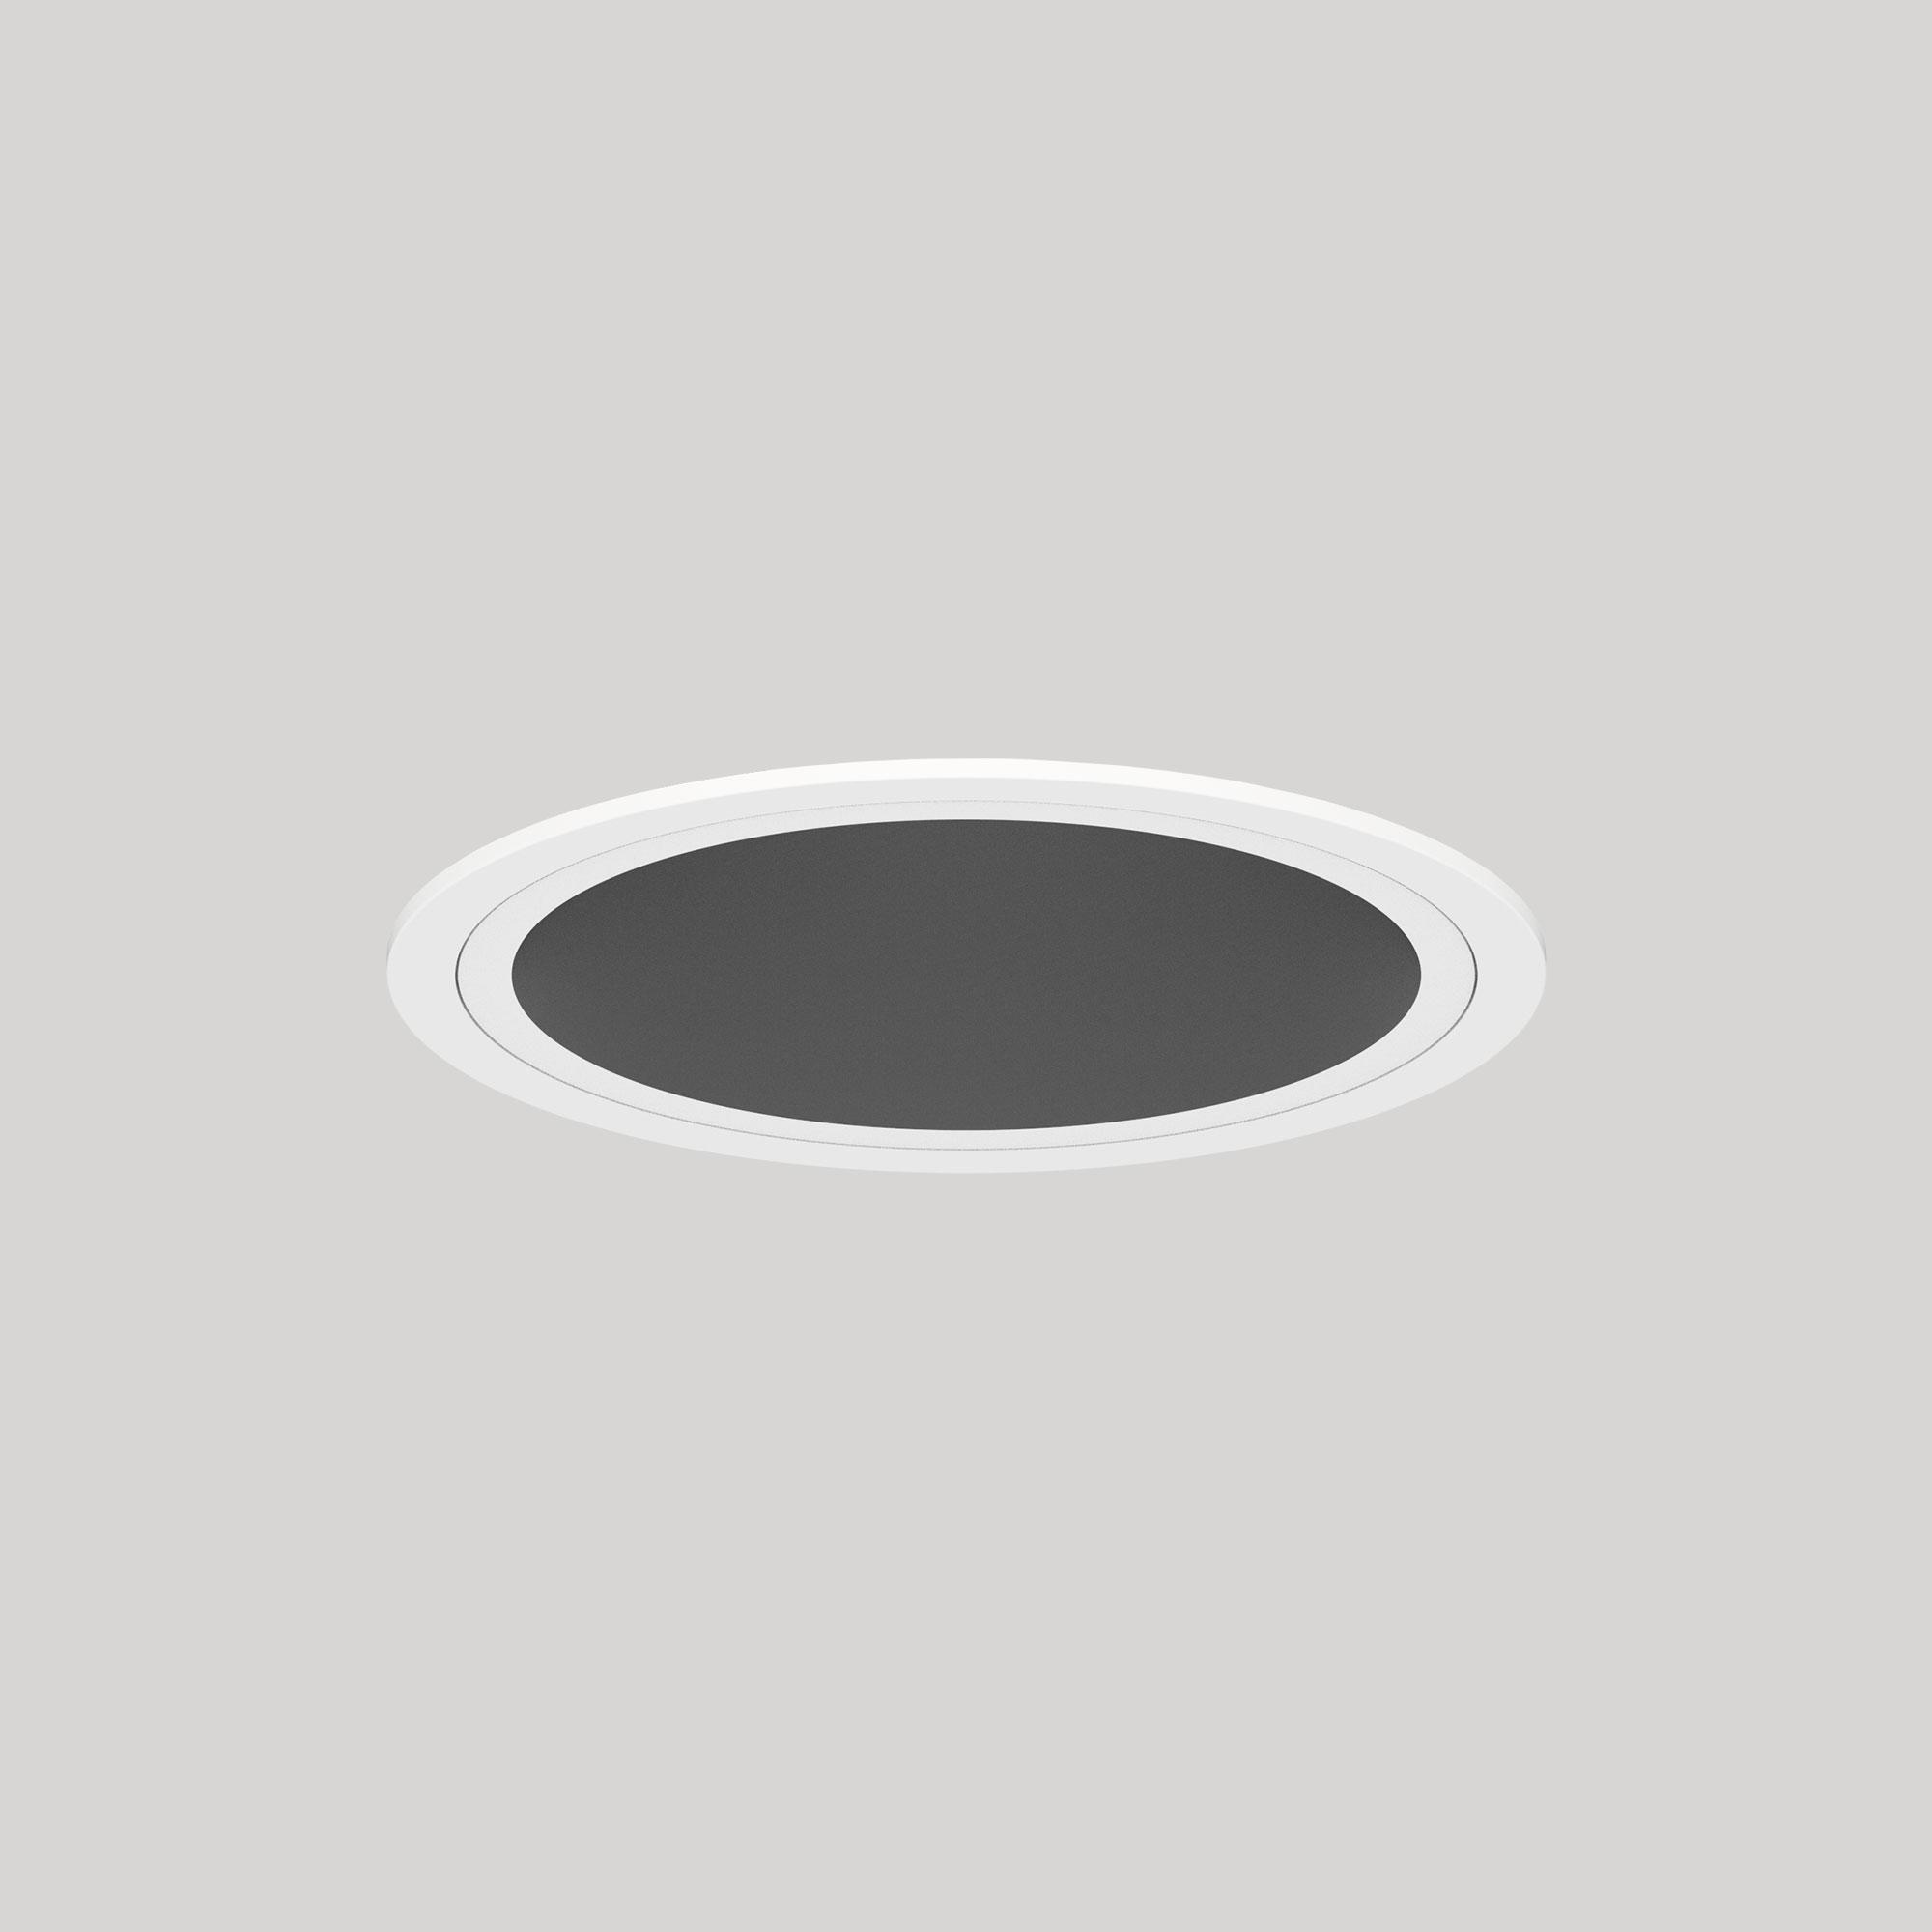 Standard 114mm Ceiling Recessed Round Fixed STD-E01C0J-WBP - Standard-STD-E01-WB-Installed.jpg